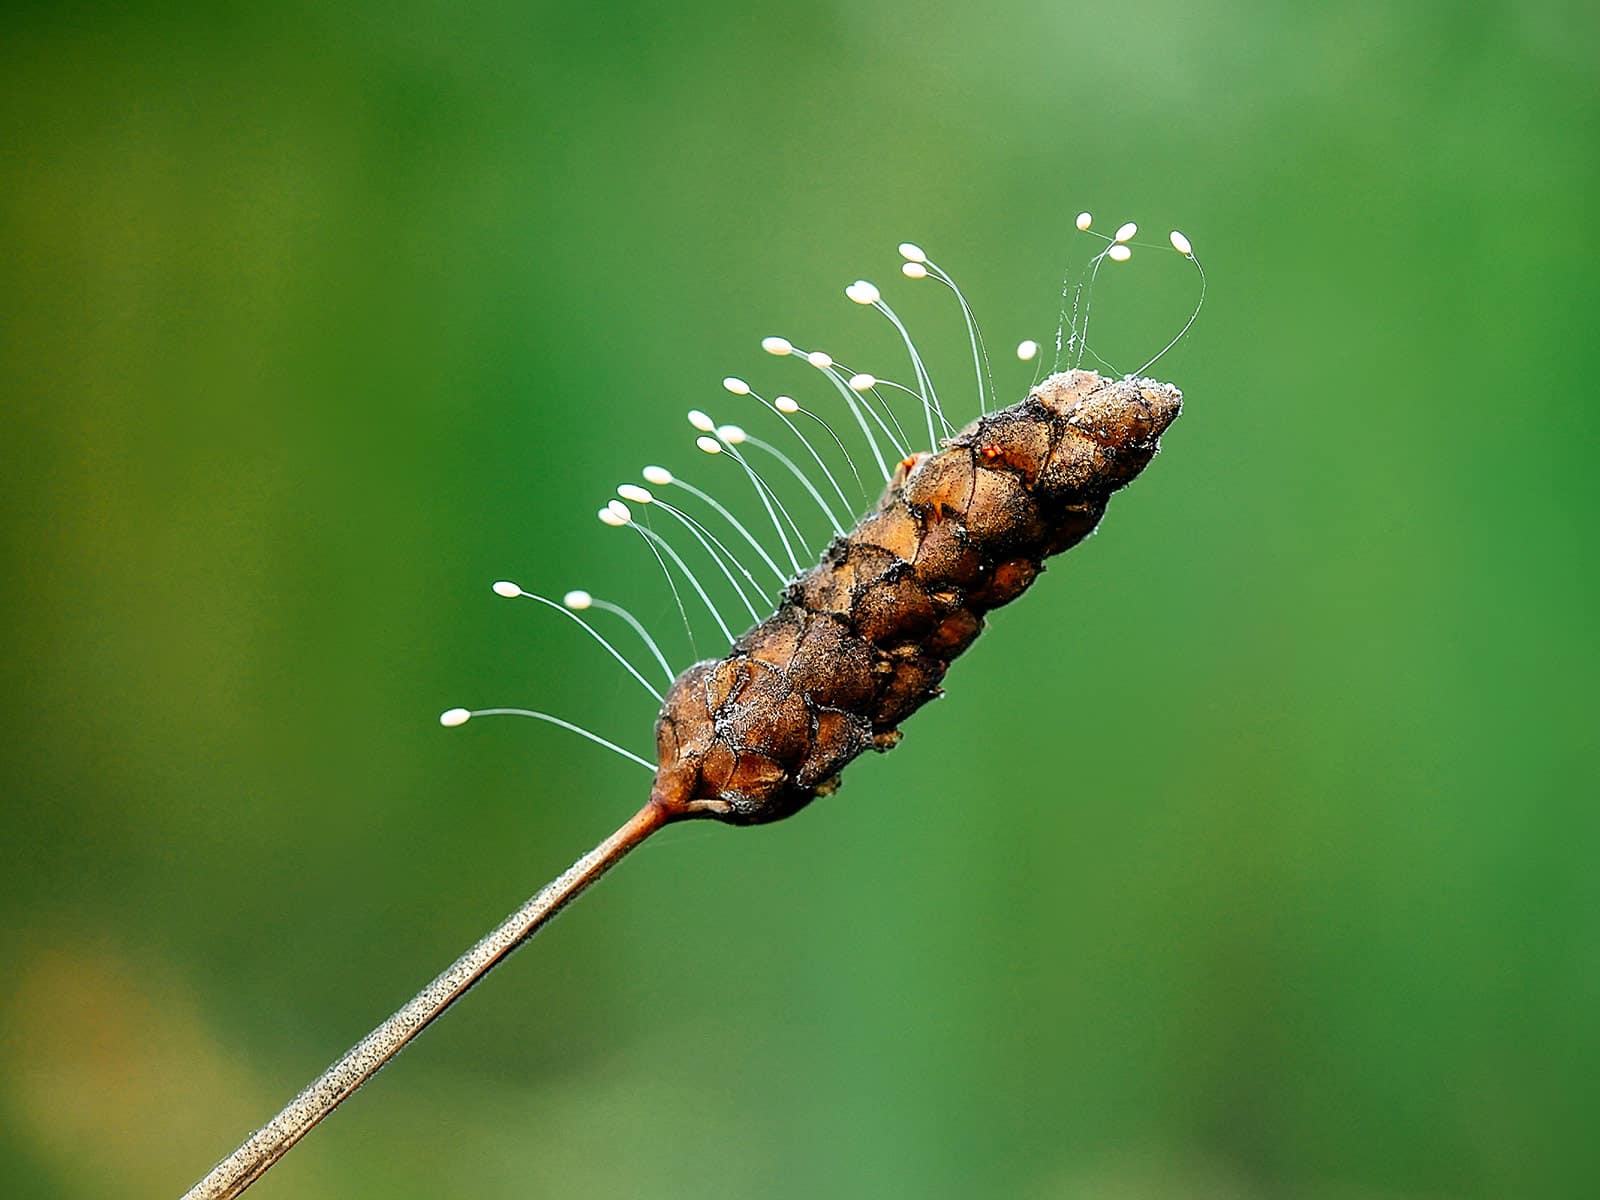 A group of lacewing eggs on hair-like strands attached to a seed head on a thin brown stem